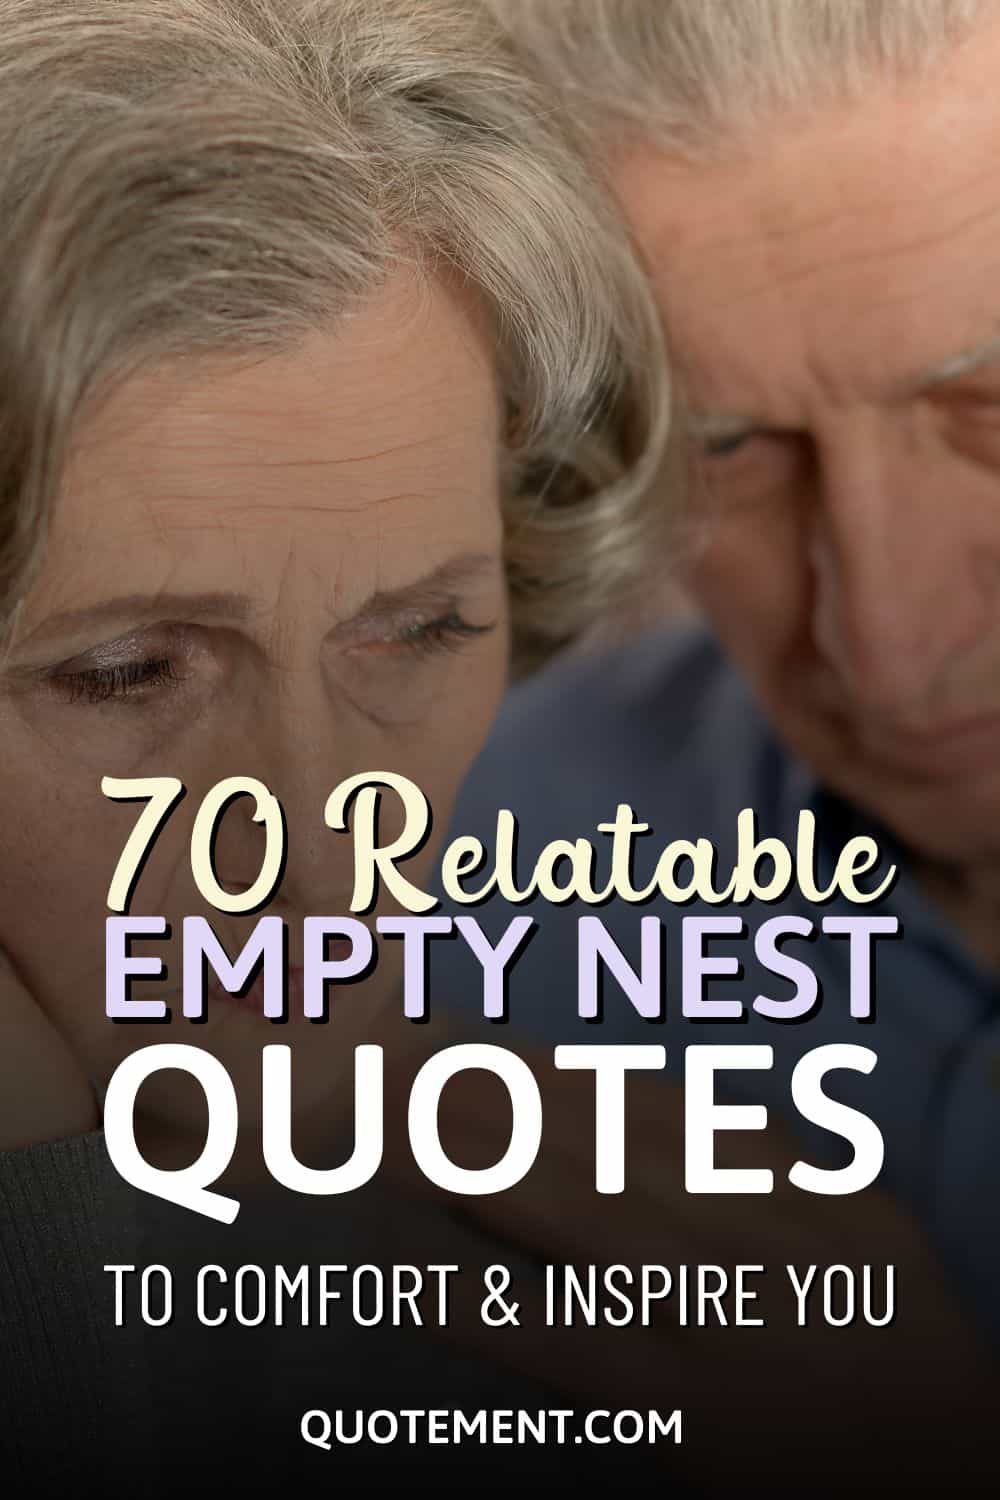 70 Relatable Empty Nest Quotes To Comfort & Inspire You